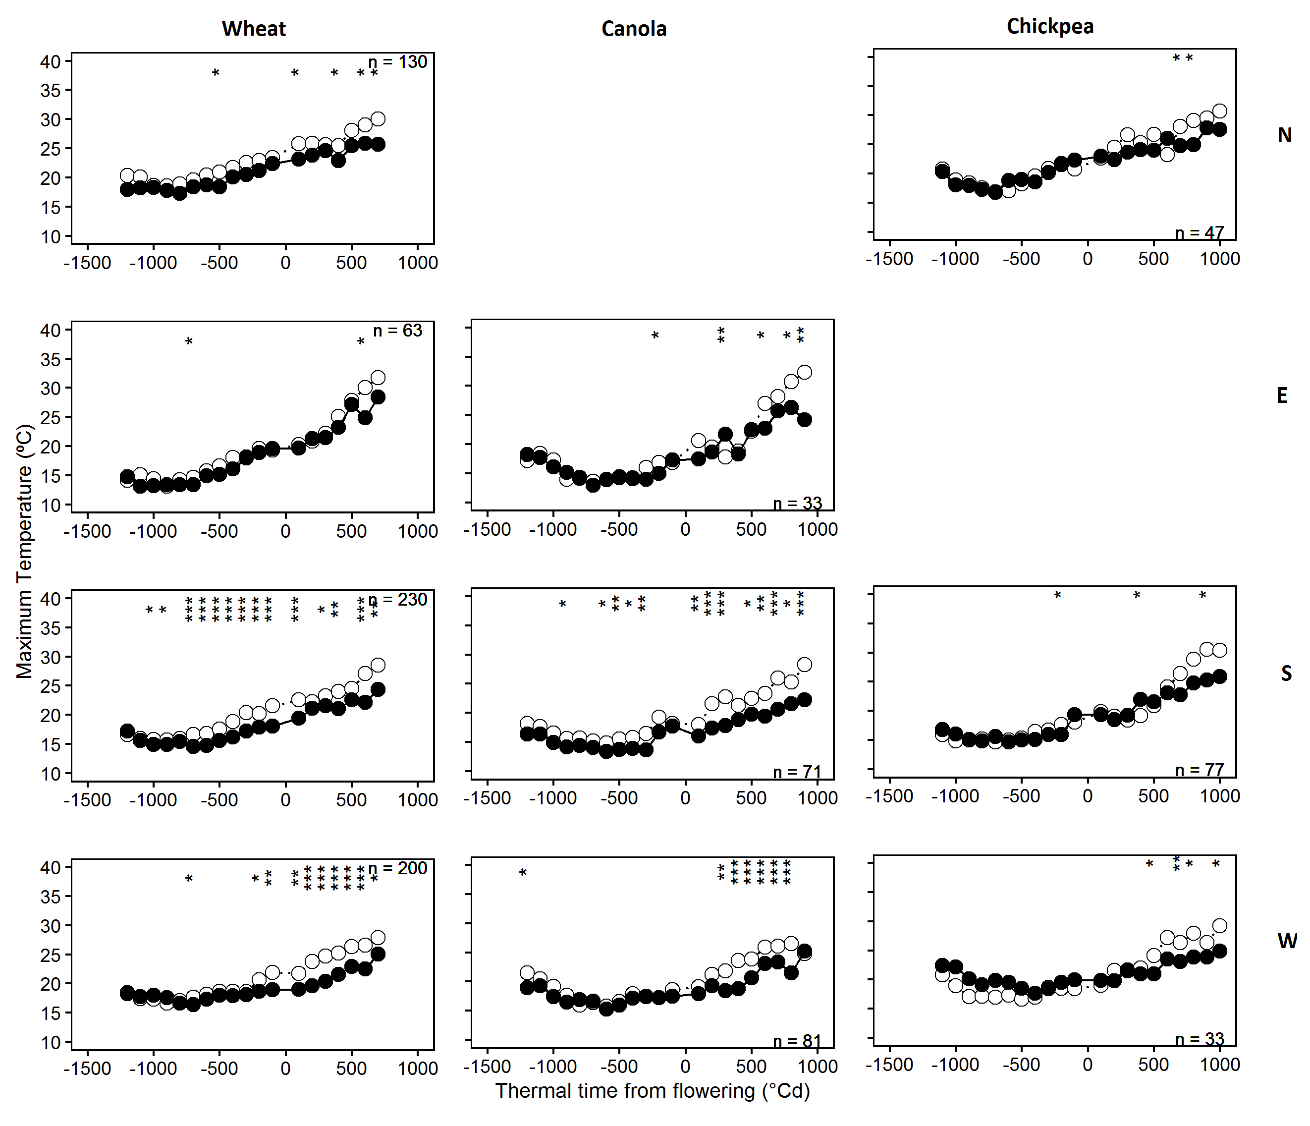 Figure 3 is ten individual graphs showing the maximum temperature associated with high (90th percentile, black symbols) and low (10th percentile, white symbols) yielding wheat, canola and chickpea crops in the north, east, south and west regions as a function of thermal time centred at flowering (x=0°Cd). Asterisks indicate significant differences at P<0.0001 (***), P < 0.01 (**) and P < 0.05 (*).